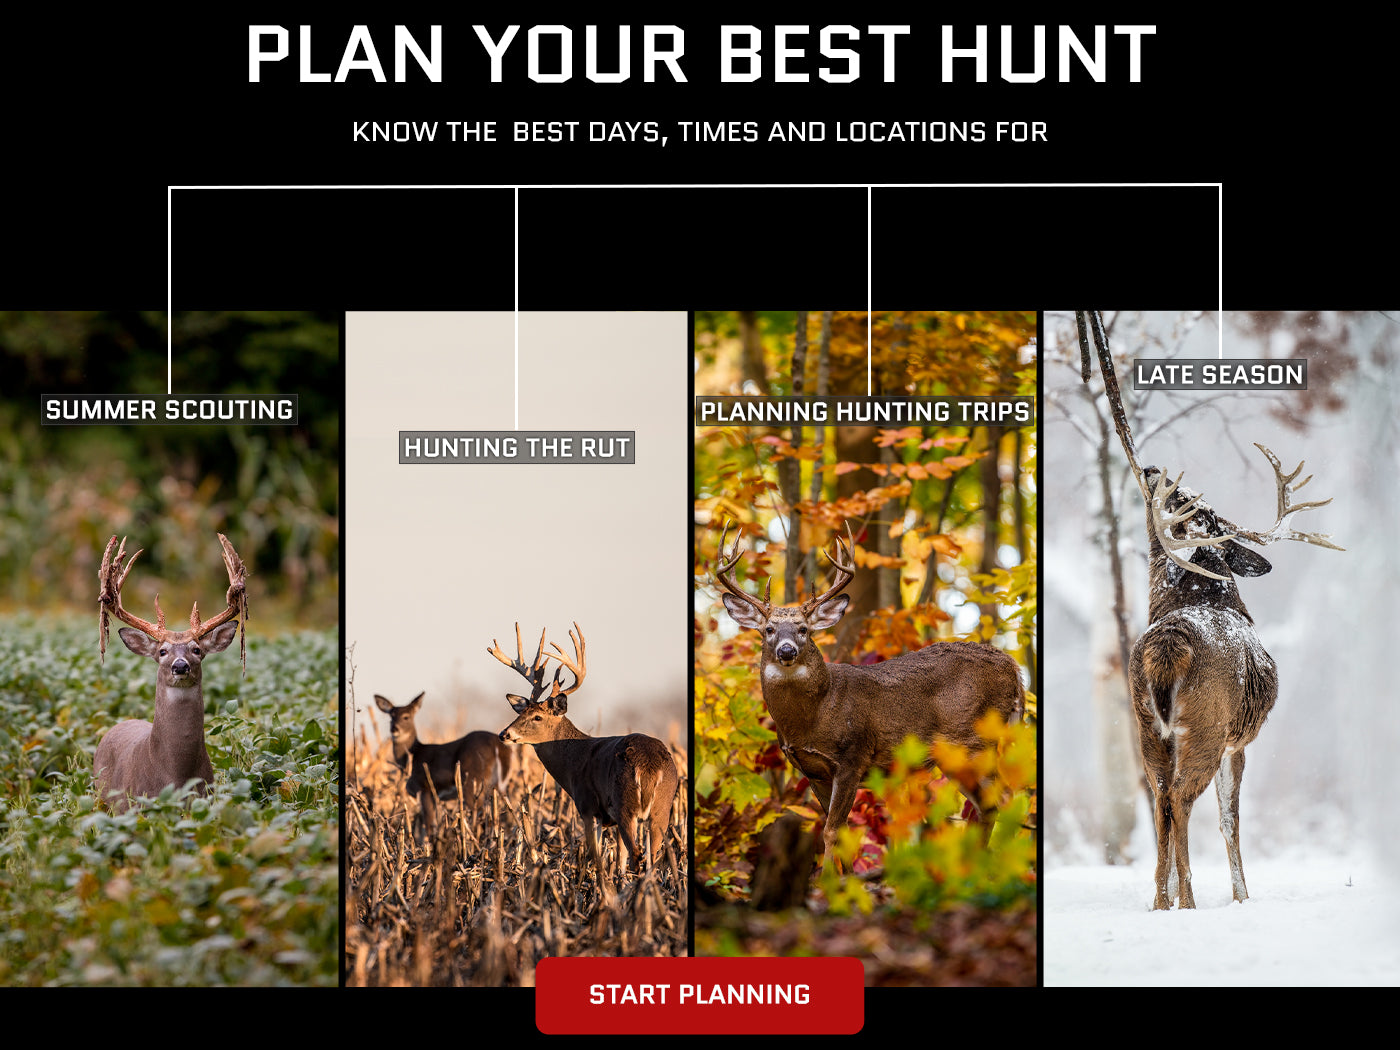 The moon is the only factor you can plan for months in advanced. The Deer Hunter's MoonGuide has 20 years of proven success. Join the growing number of hunters who have harvested the biggest buck of their lives on the "Red Moon" using the MoonGuide.